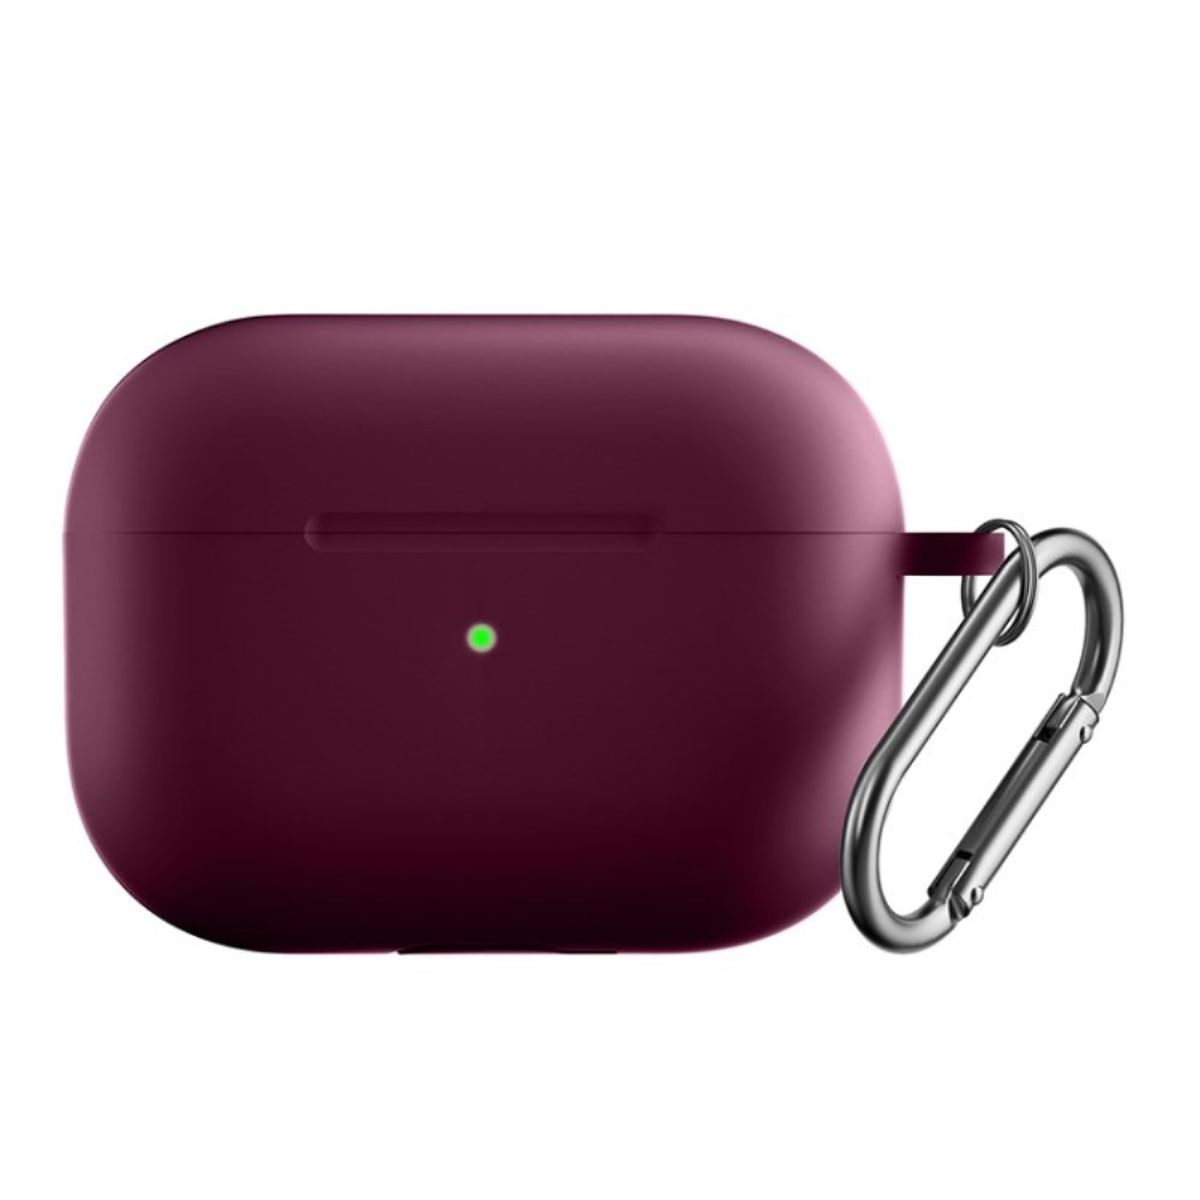 Silikoncover Ladecase Apple COVERKINGZ x Pro weinrot, 2 für Airpods